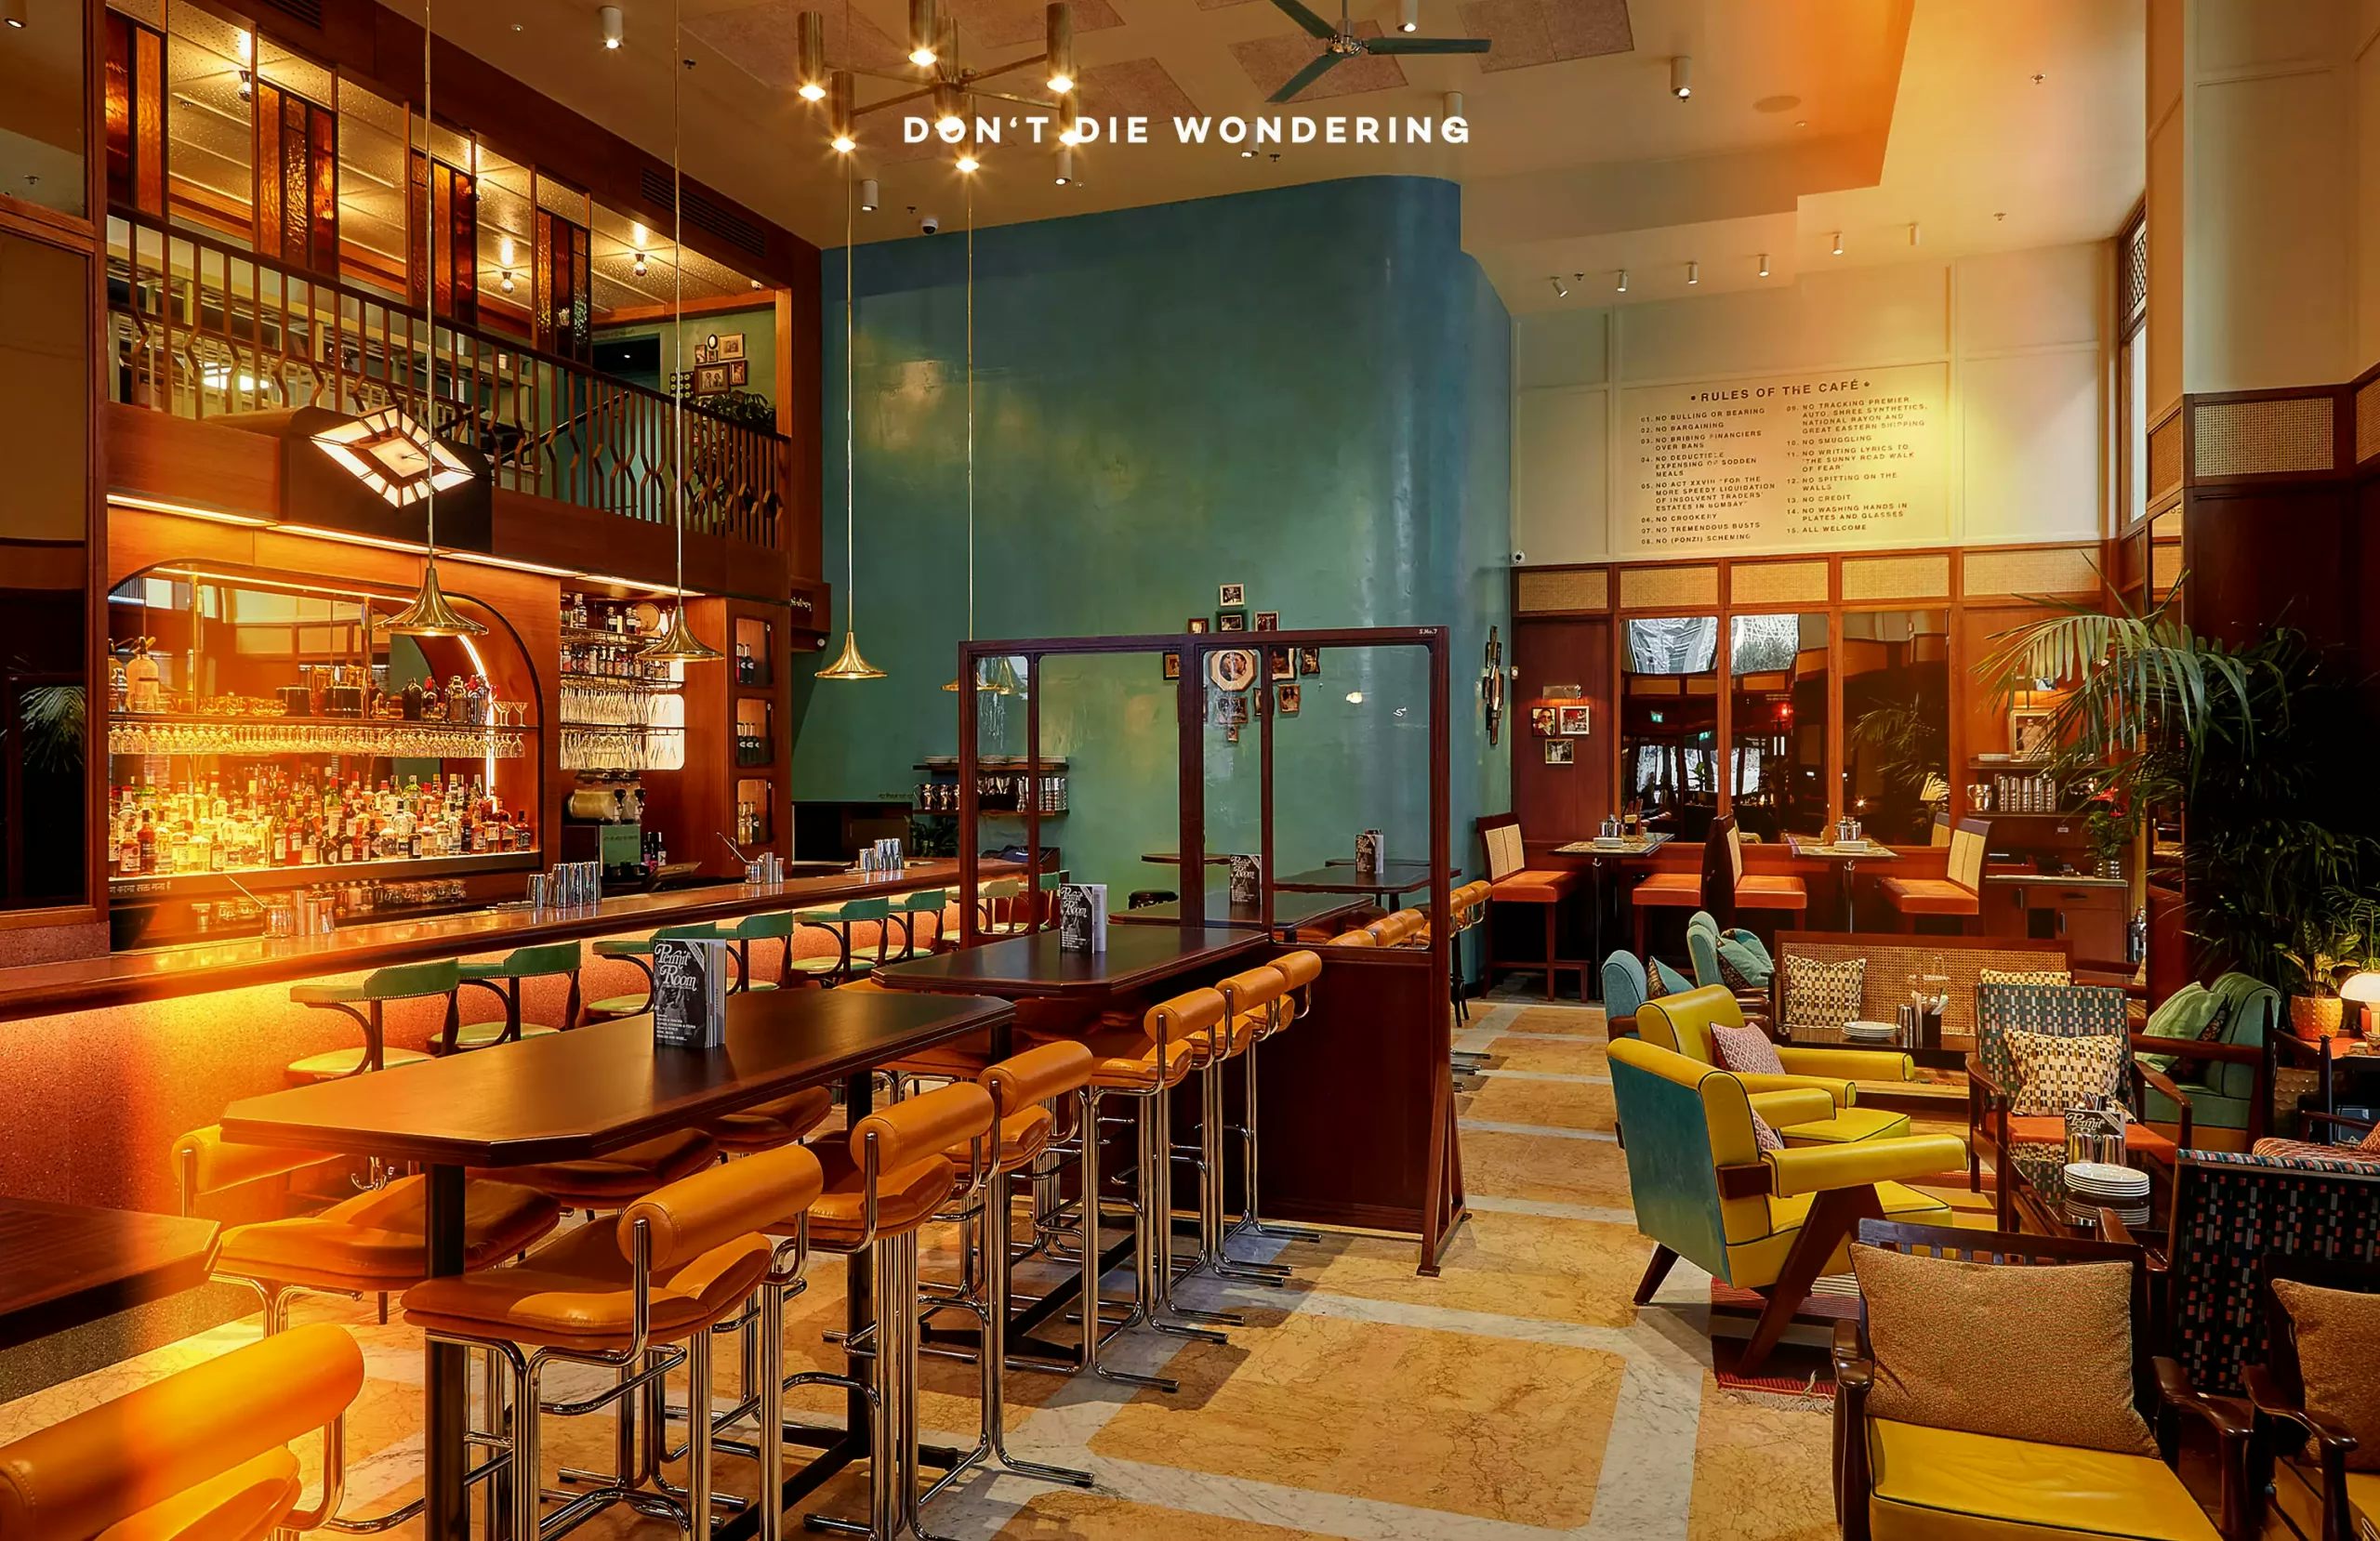 Dishoom in Canary Wharf is a new 1970s Interior Design Oasis in London